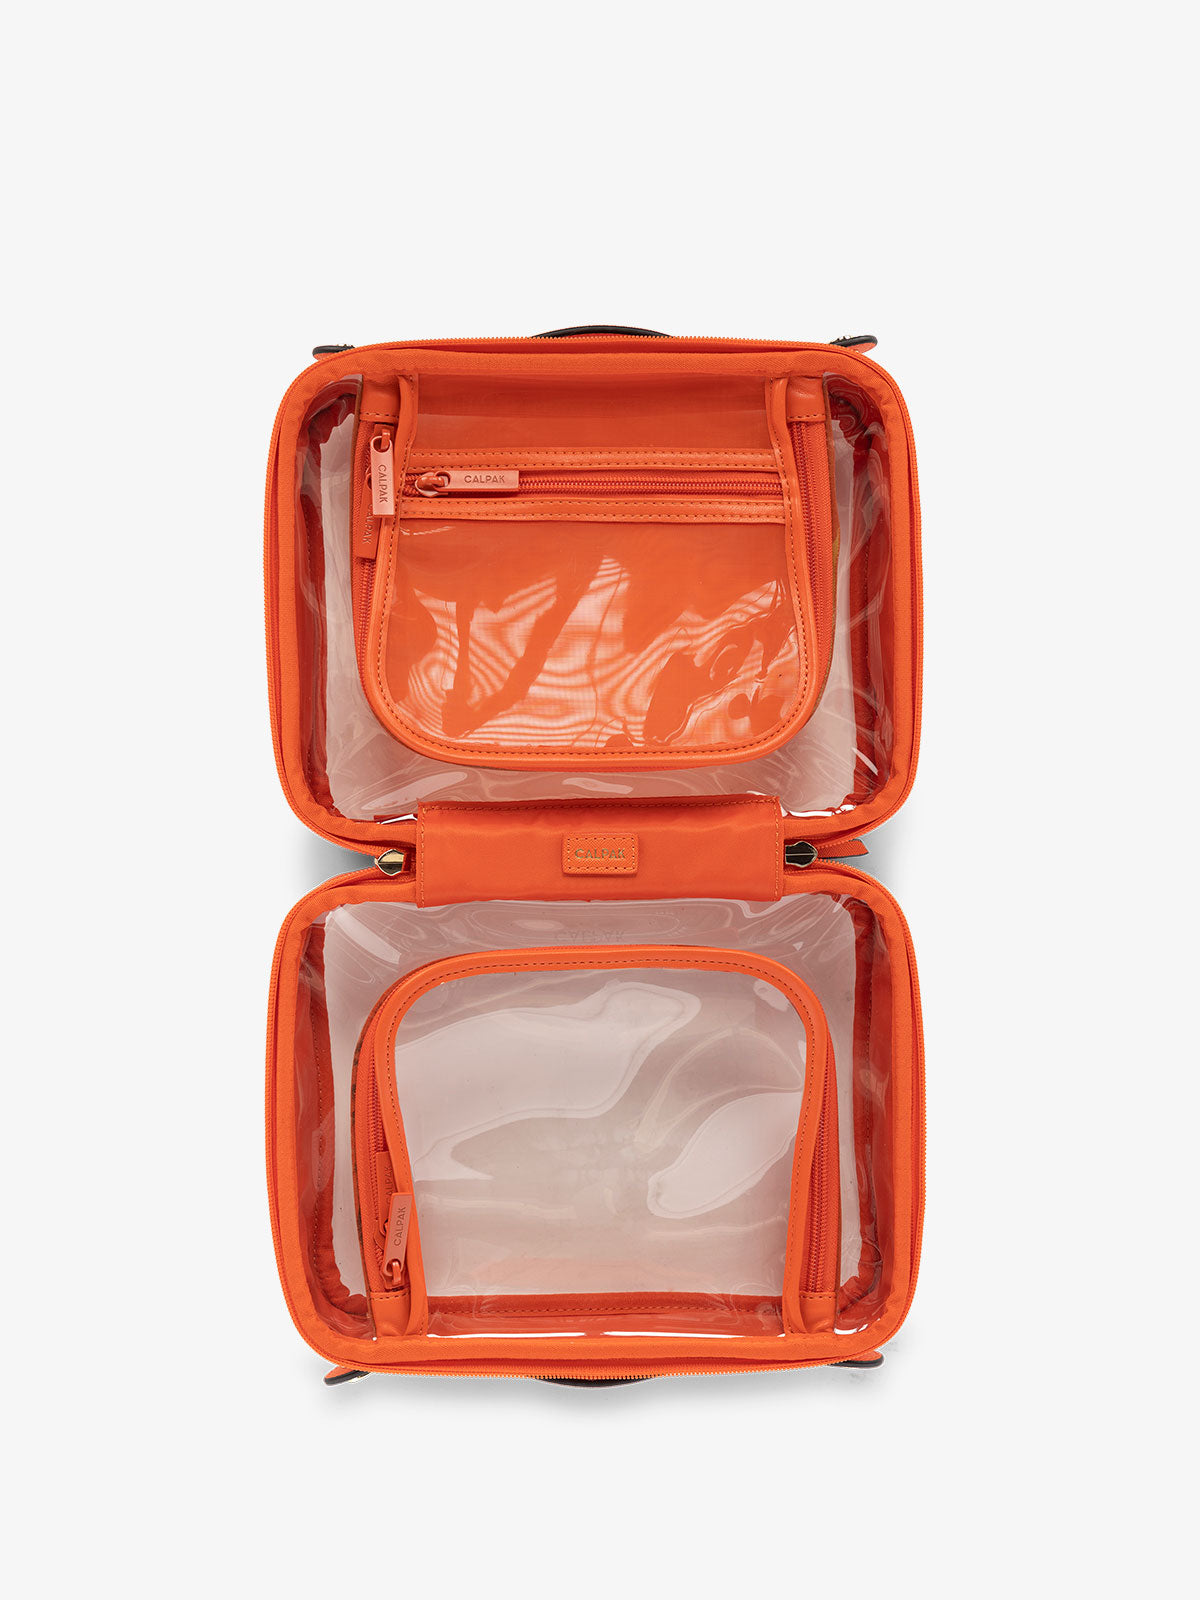 CALPAK clear skincare bag with multiple zippered compartments in orange